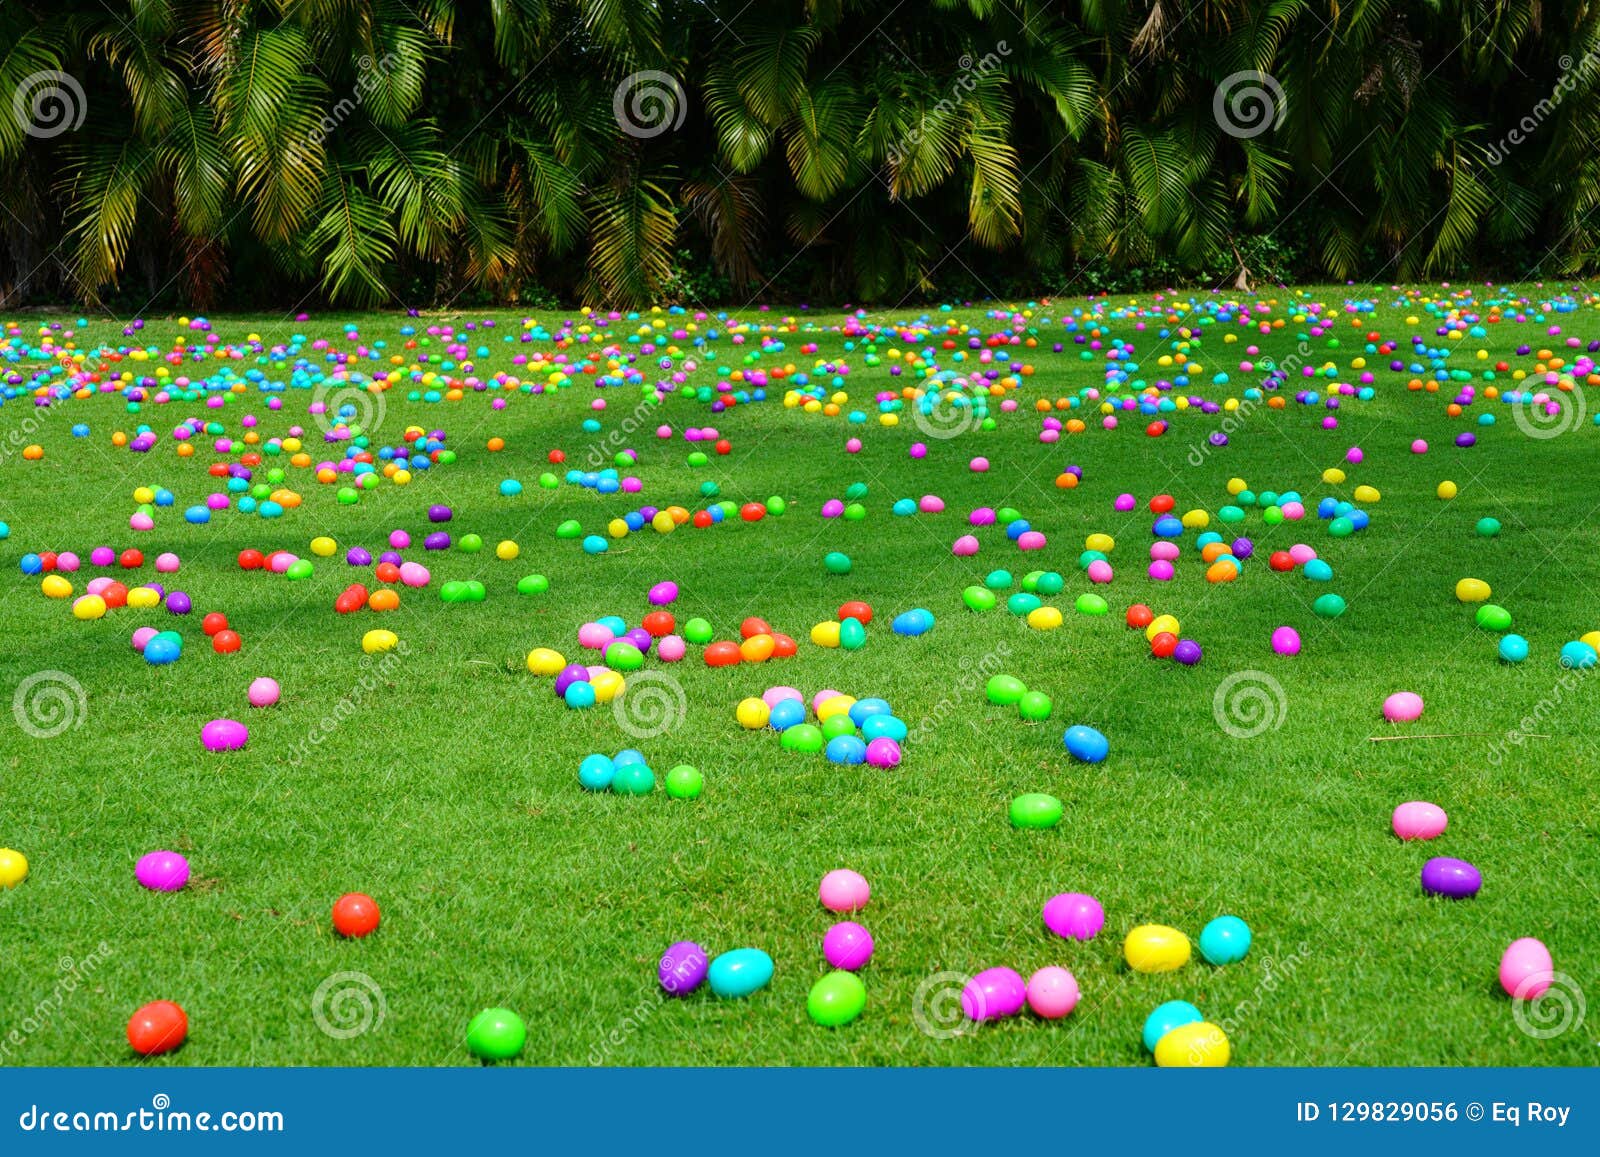 an easter egg hunt with plastic eggs on a green lawn